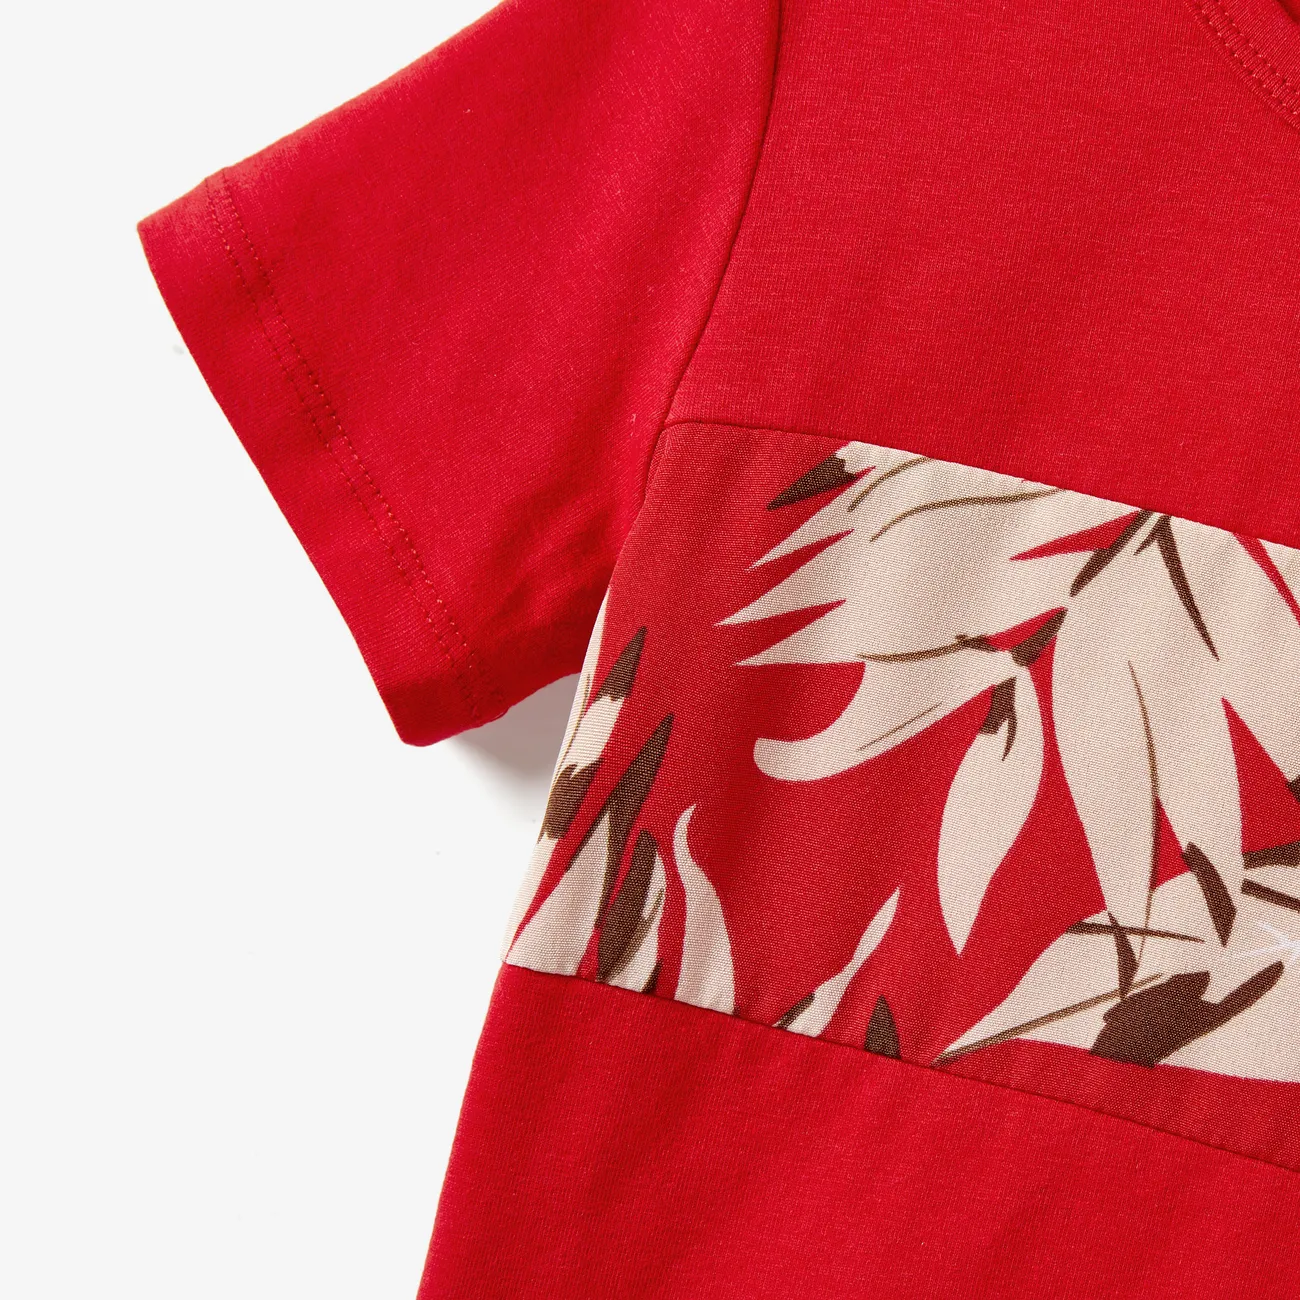 Family Matching Floral Panel T-shirt and Concealed Button Leaf Print Strap Dress Sets Red-2 big image 1